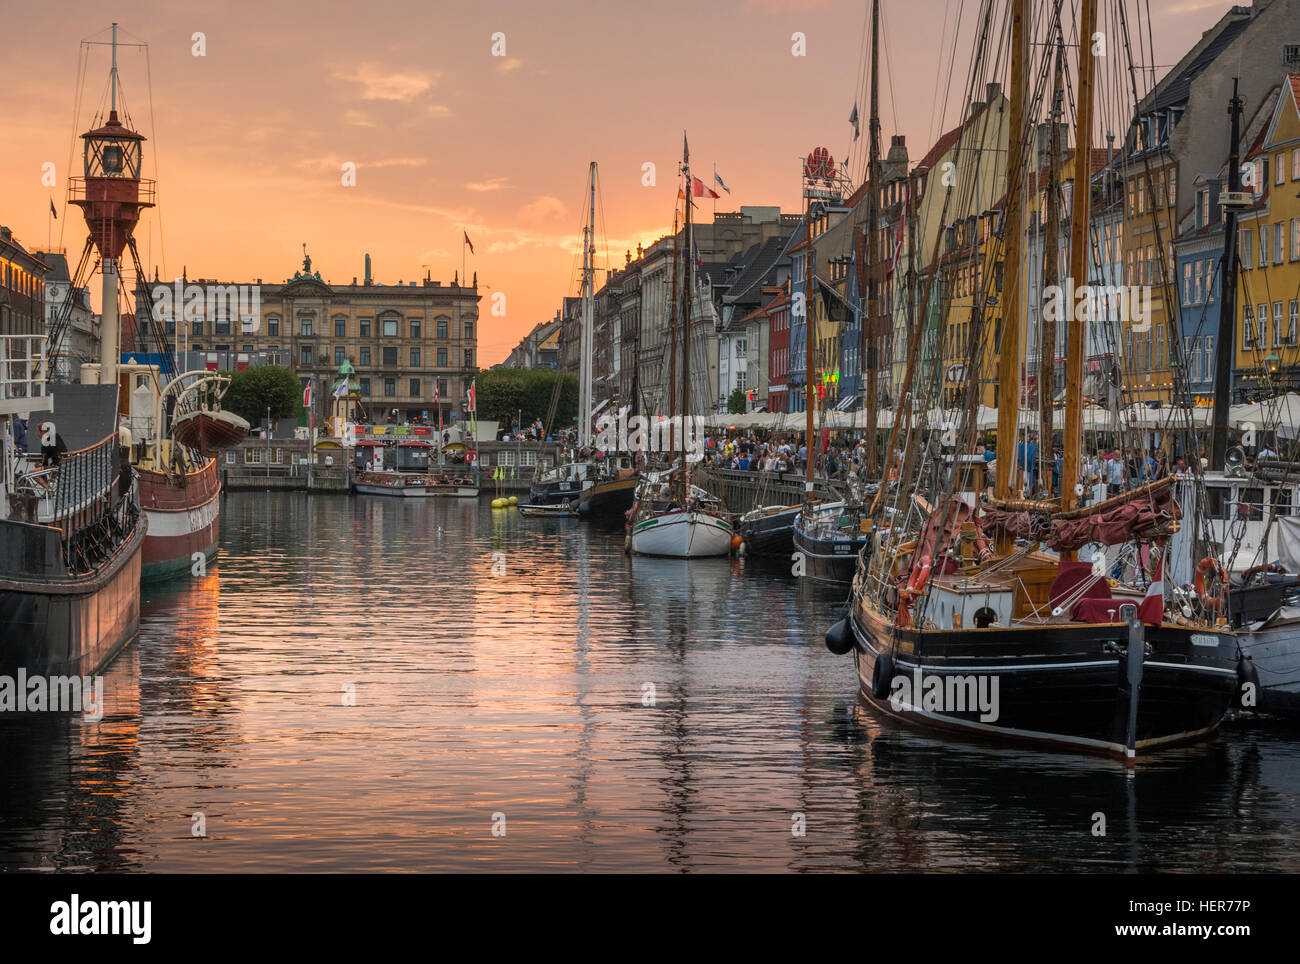 Coloured buildings and tall wooden ships in Nyhavn, Copenhagen Stock Photo